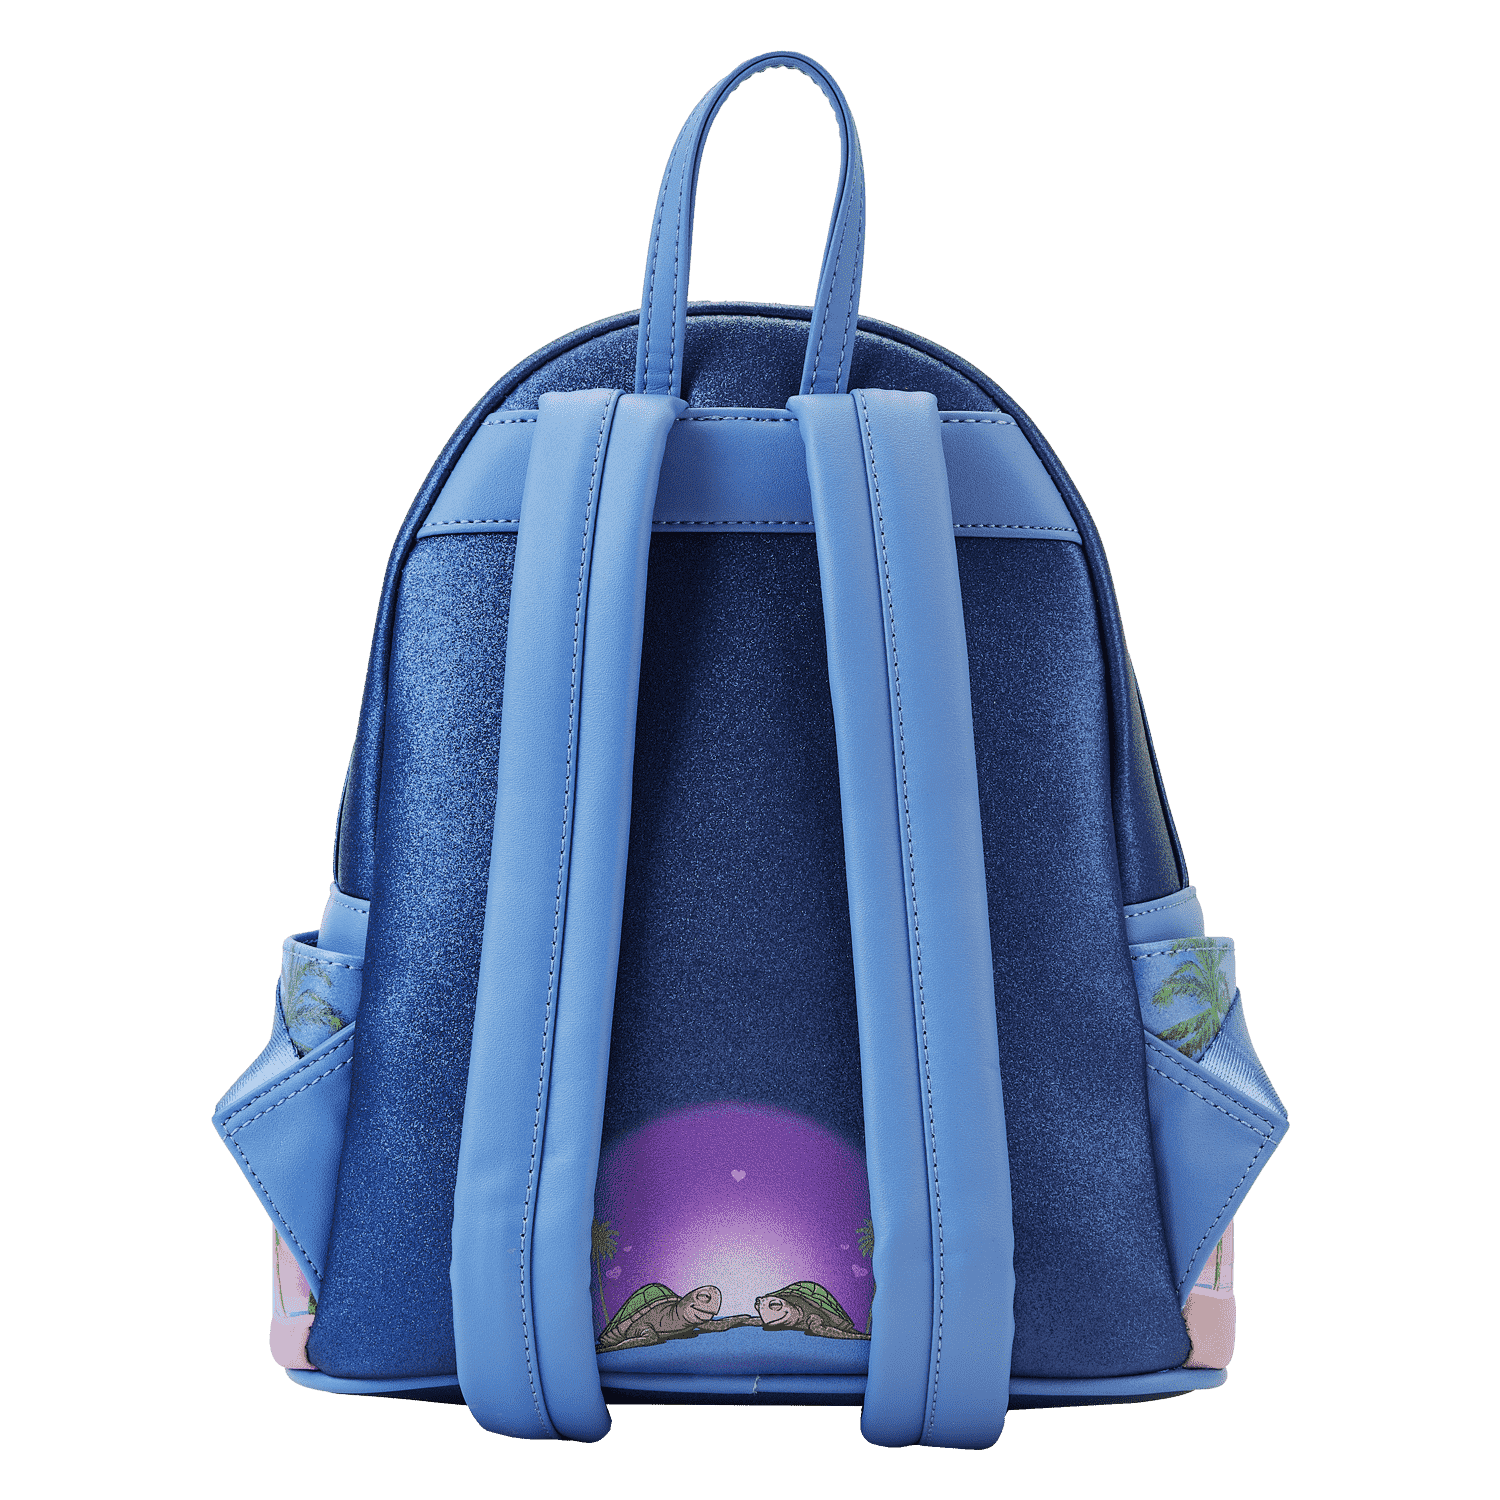 Buy Limited Edition - I Lava You Mini Backpack at Loungefly.